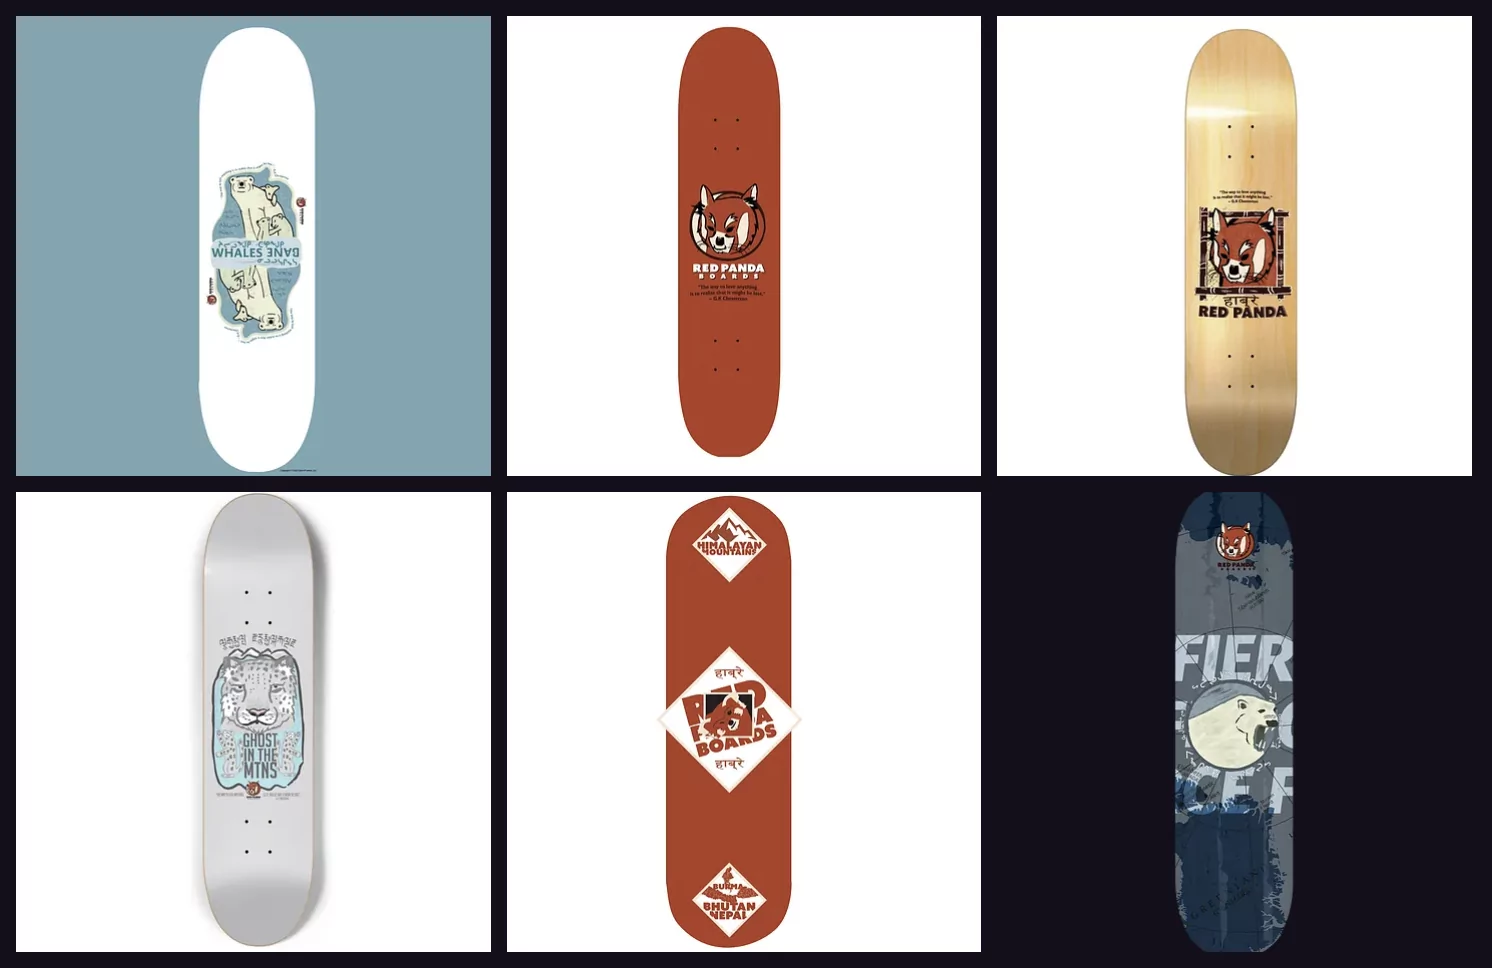 Are skateboarding and Red Panda Boards affordable sporting options?